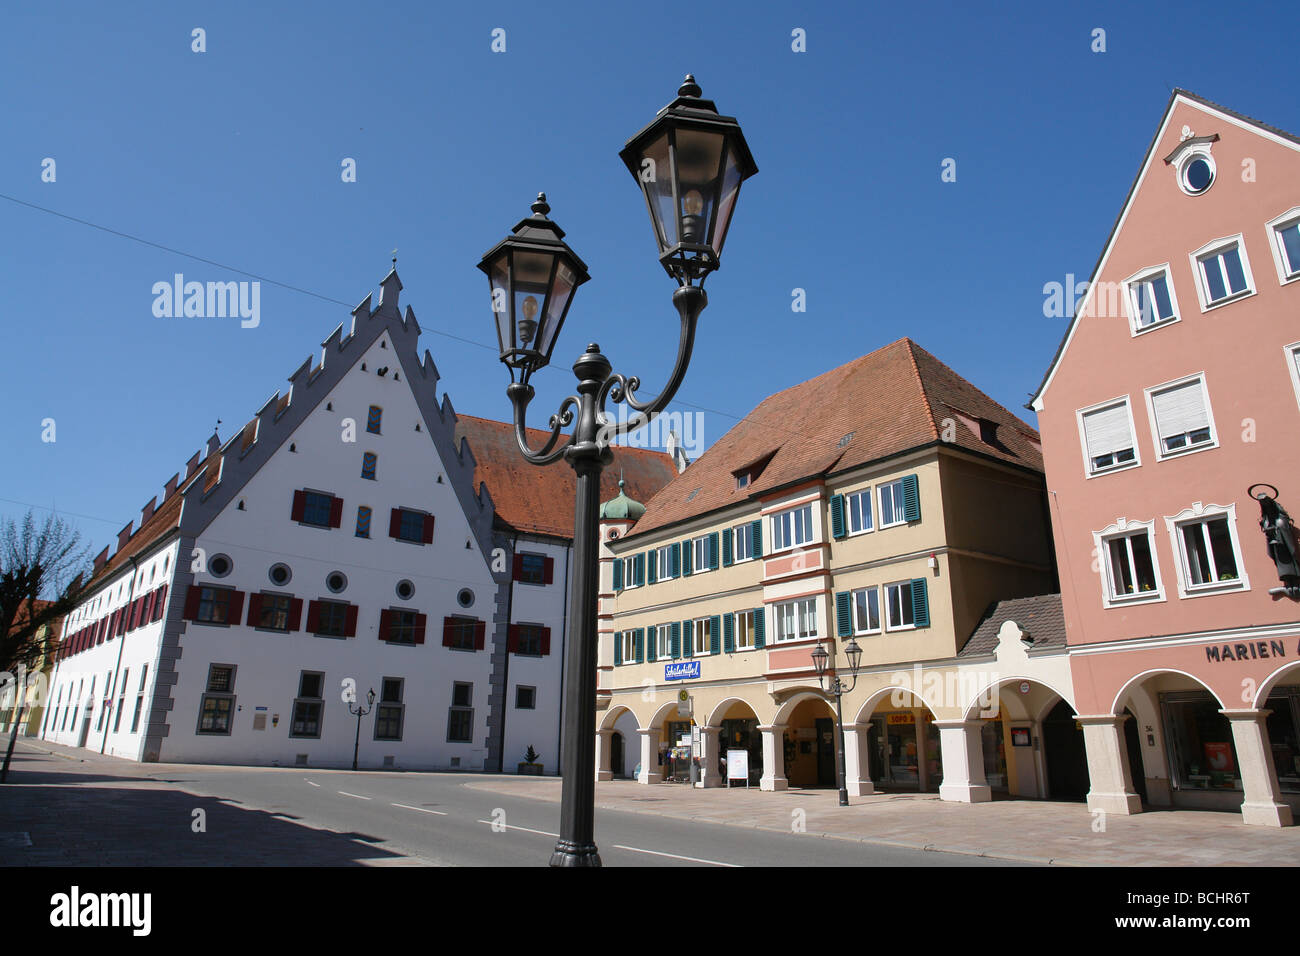 Reichsstrasse with street lamp Donauworth in Bavaria The Romantic Road Germany May 07 Stock Photo